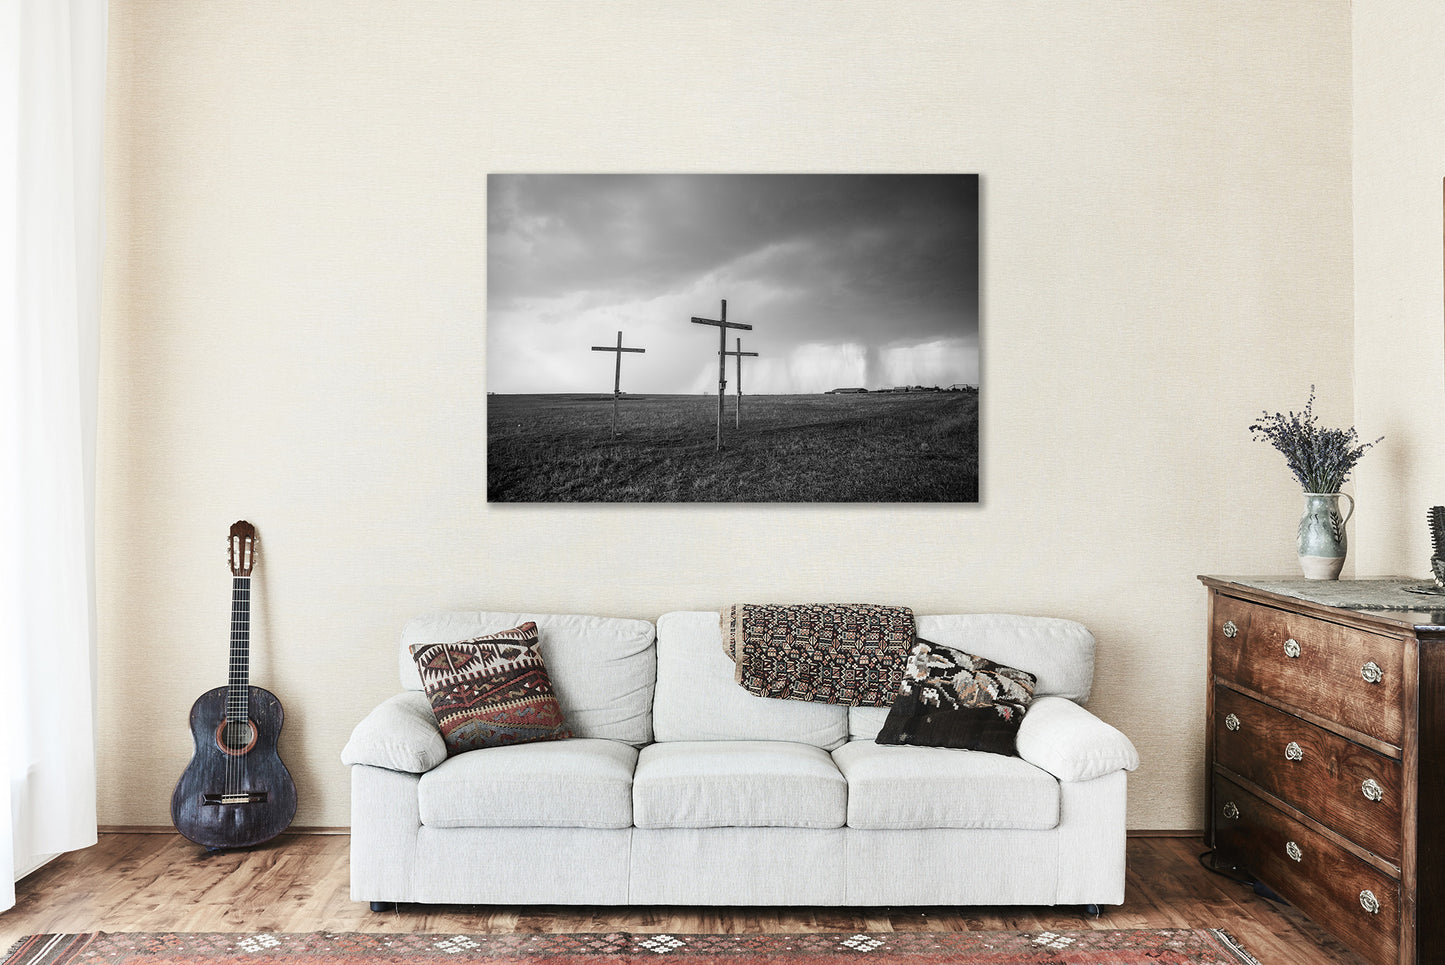 Canvas Wall Art | Three Wooden Crosses Photo | Christianity Gallery Wrap | Texas Photography | Black and White Picture | Religious Decor